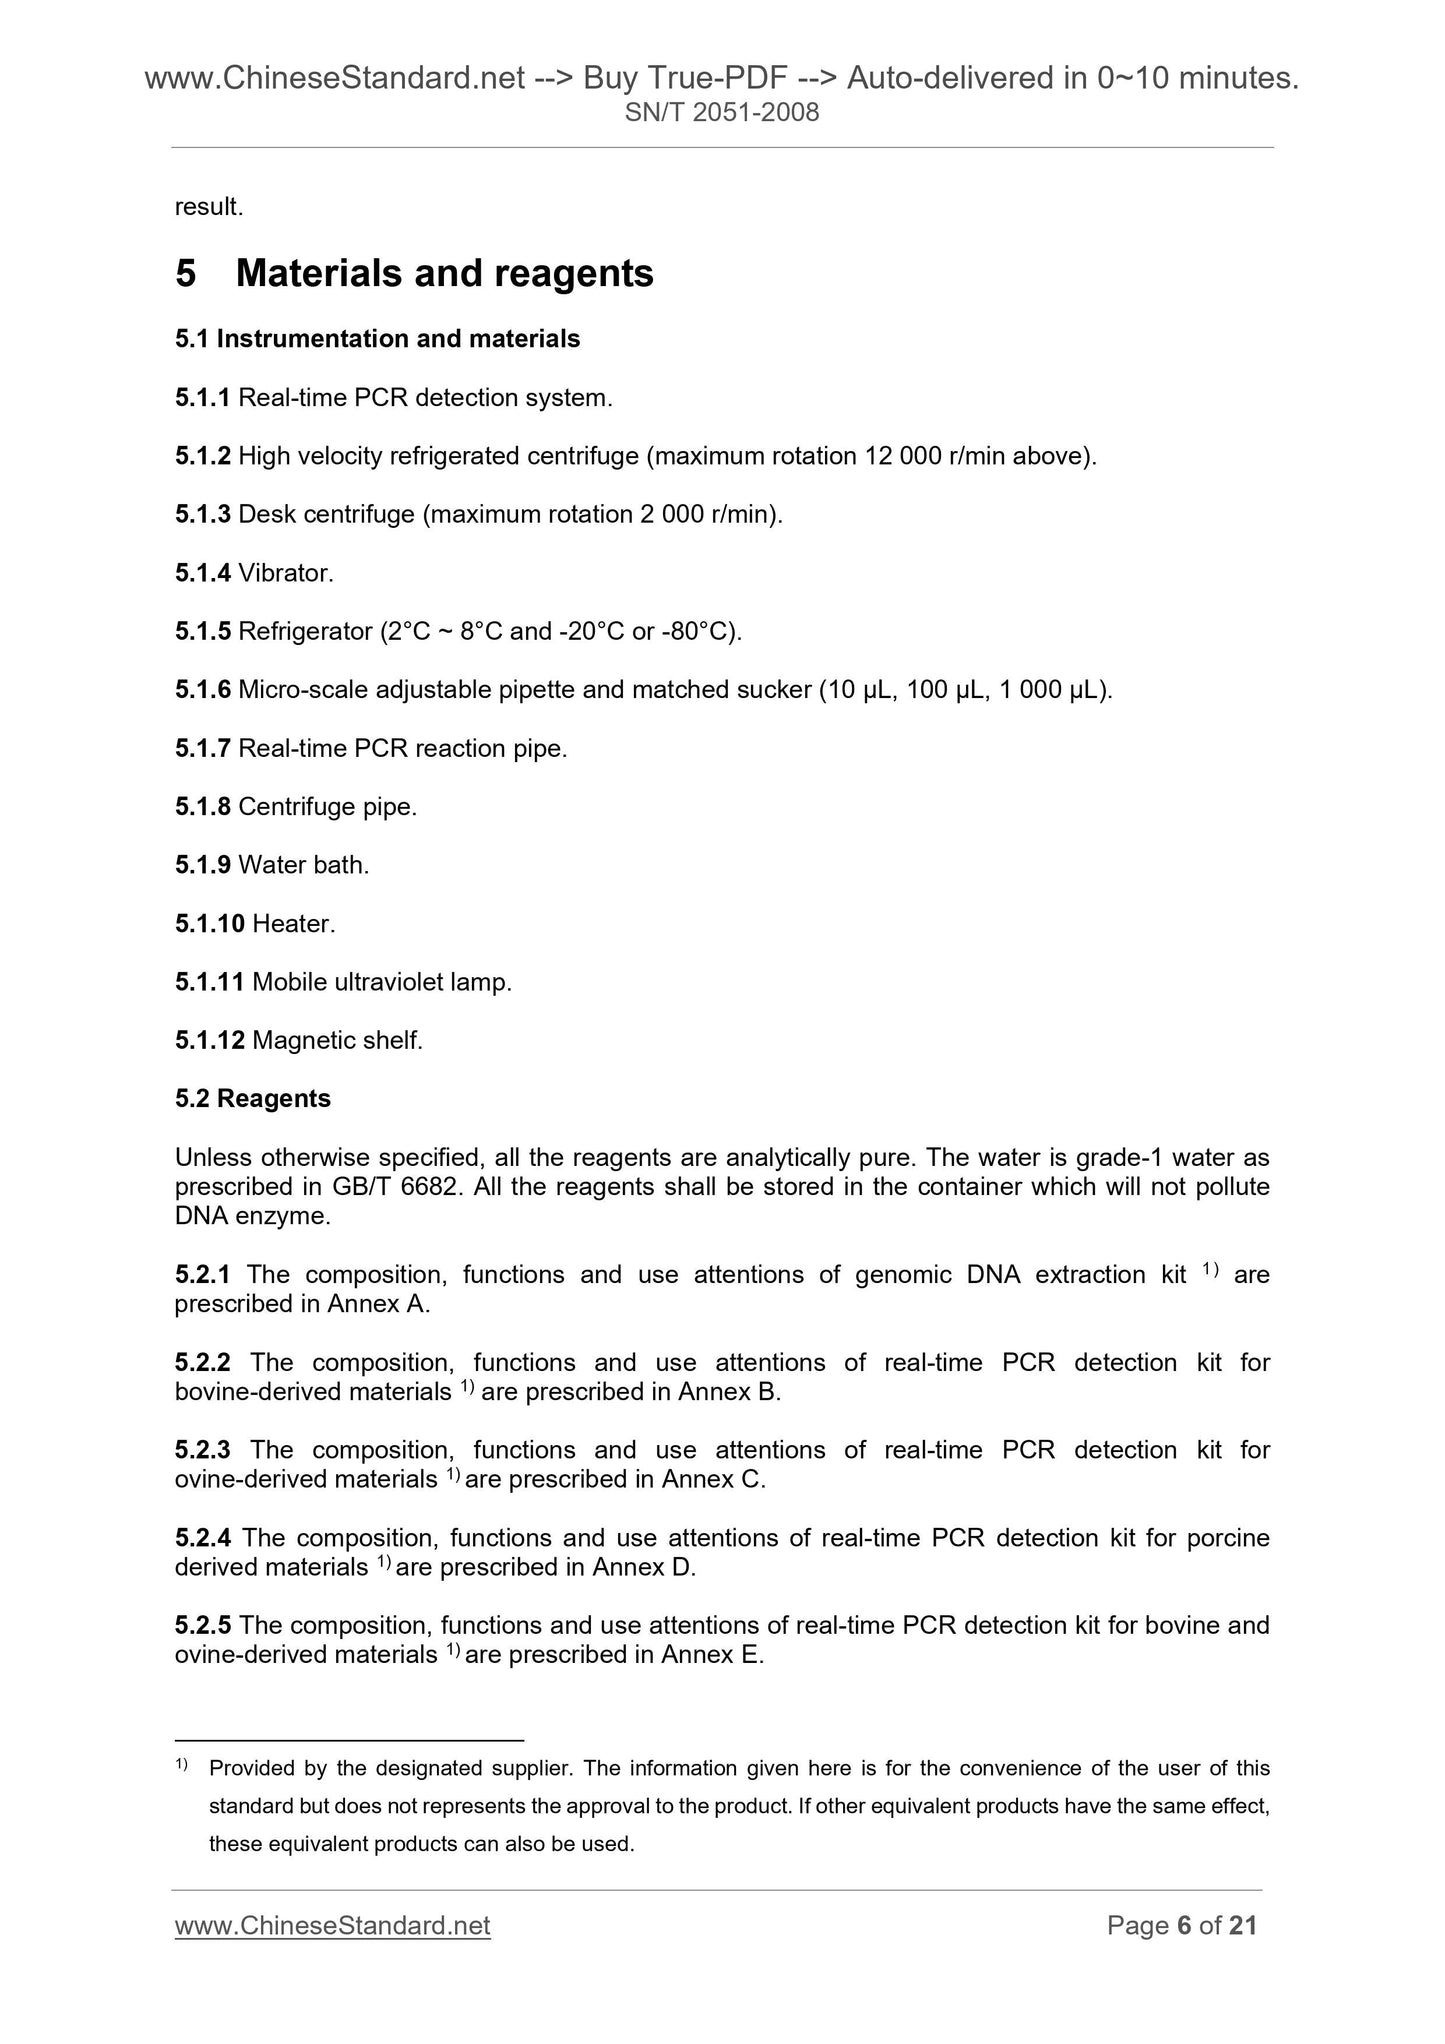 SN/T 2051-2008 Page 5